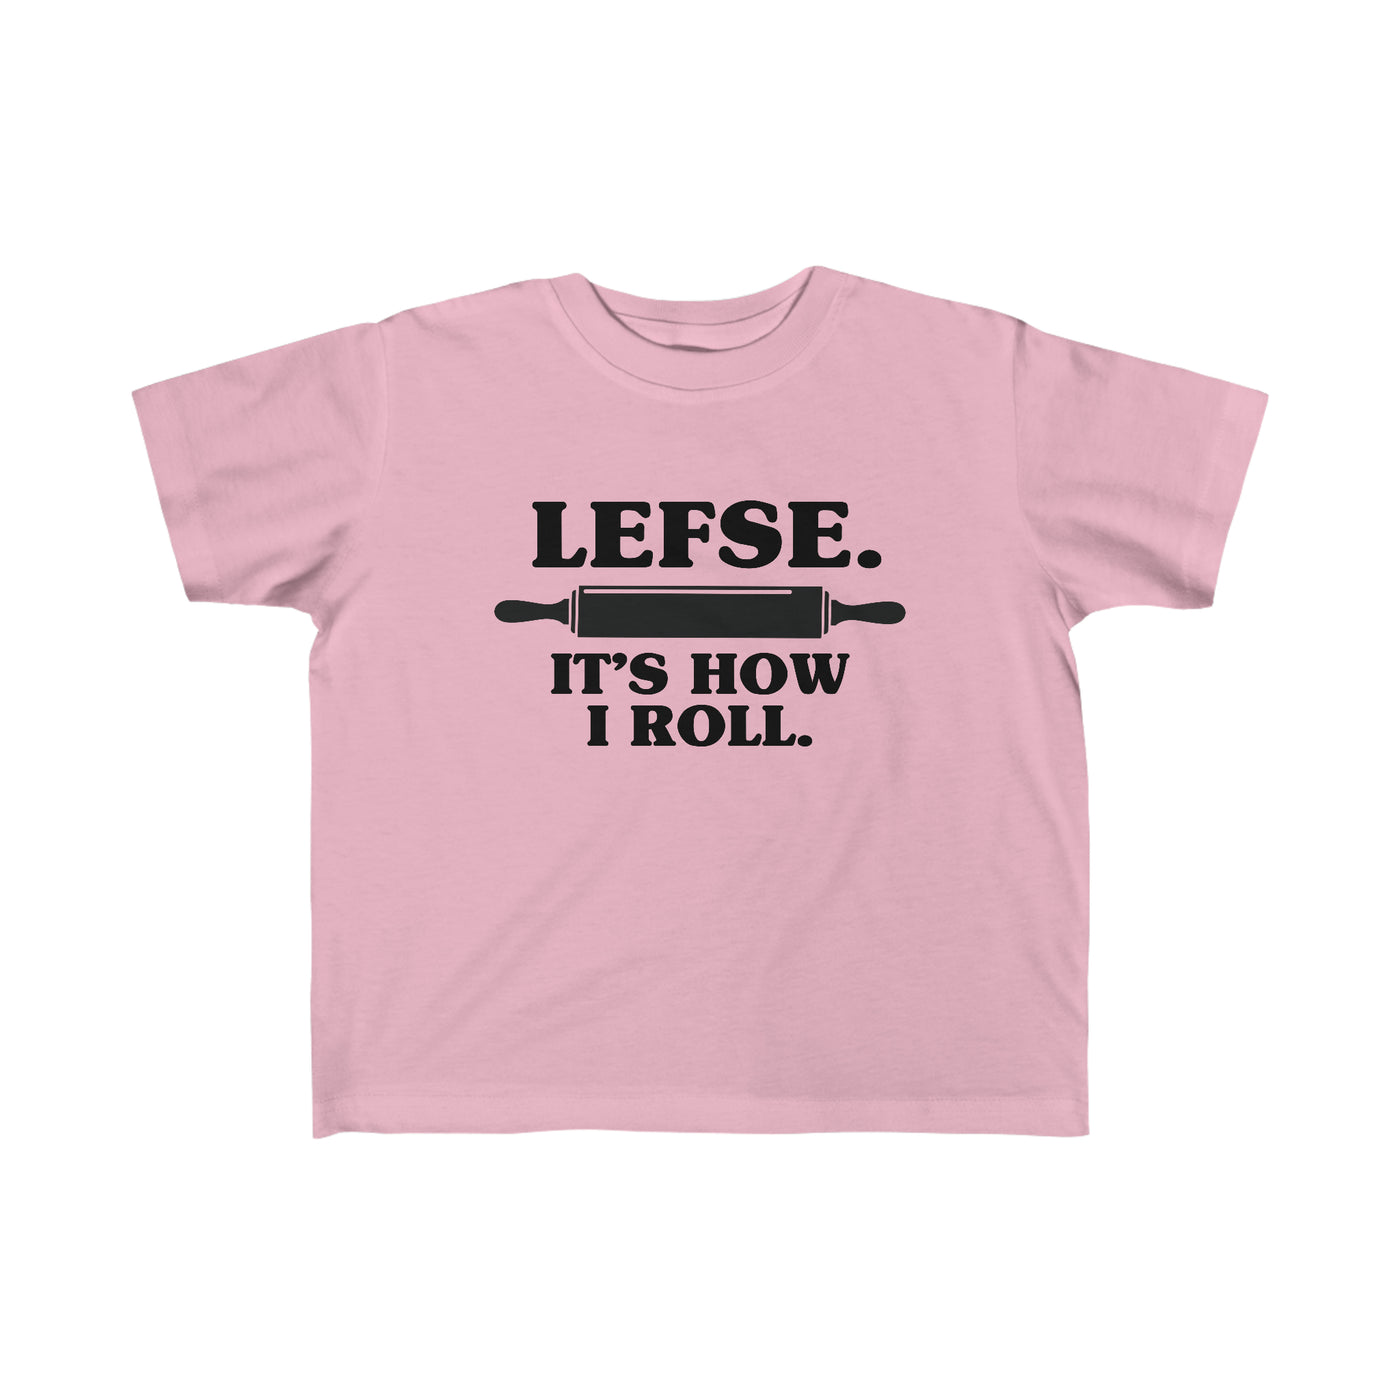 Lefse It's How I Roll Toddler Tee